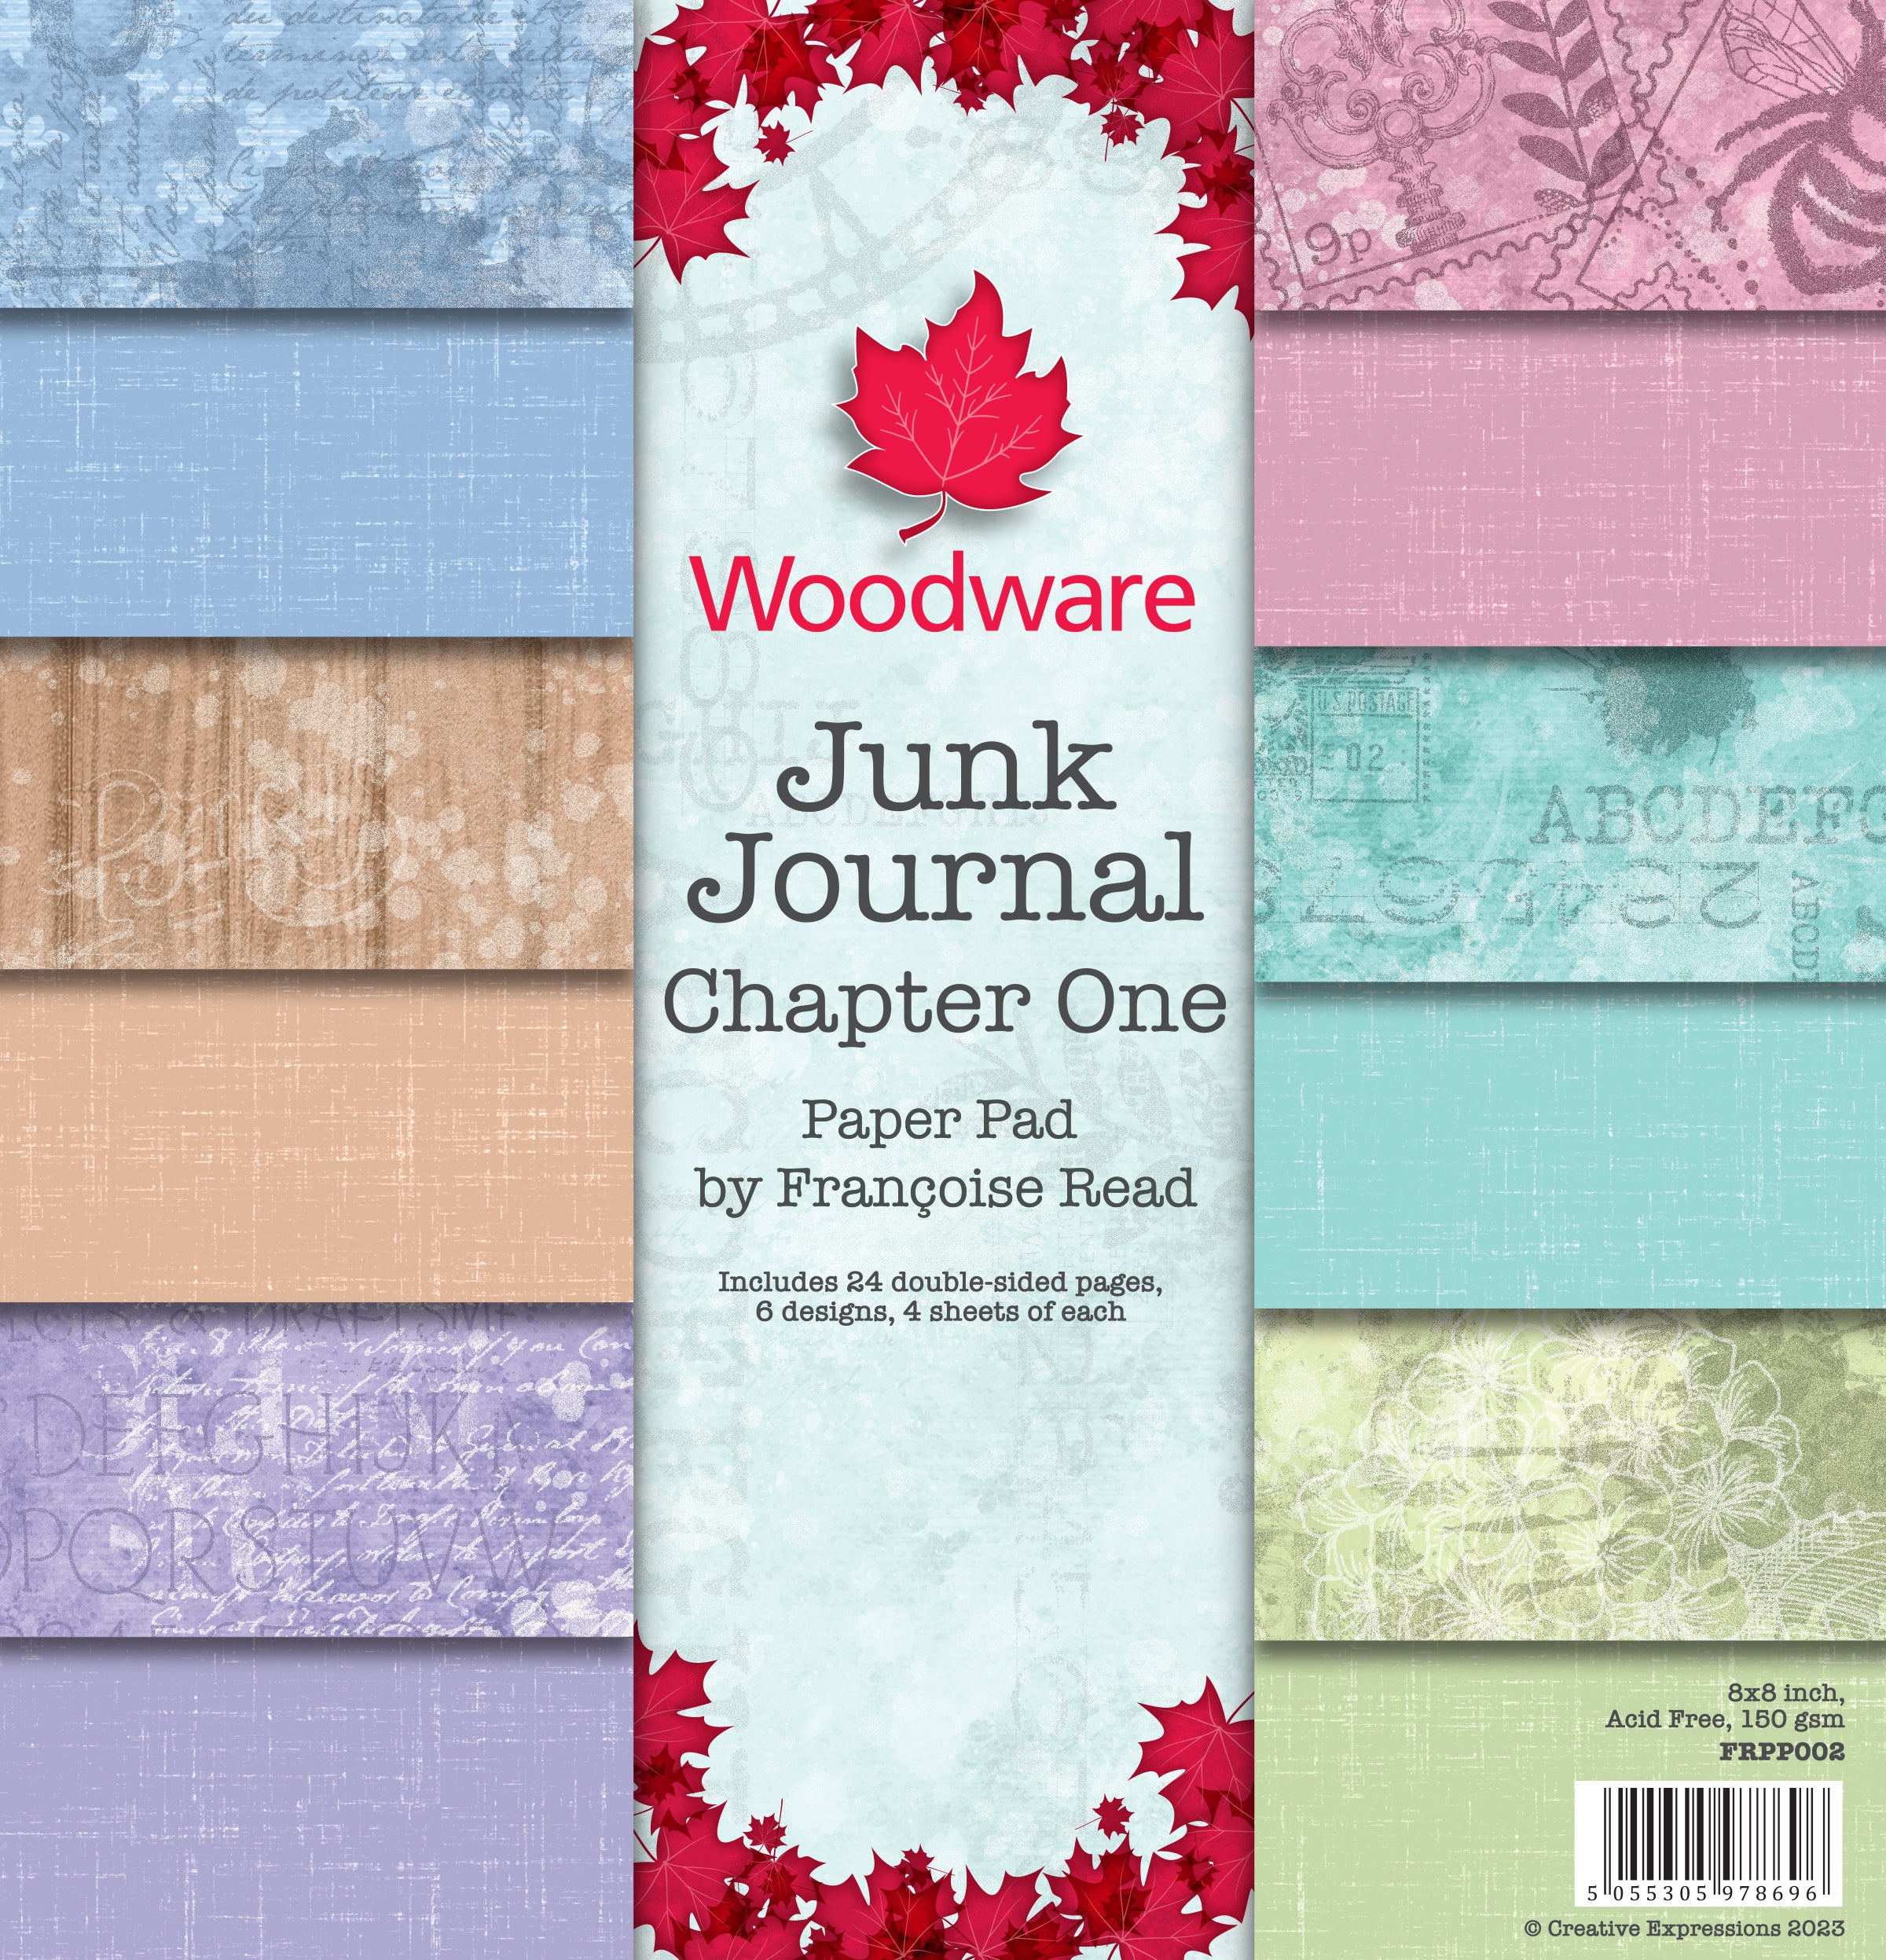 Woodware Francoise Read Junk Journal Chapter One 8in x 8in Paper Pad